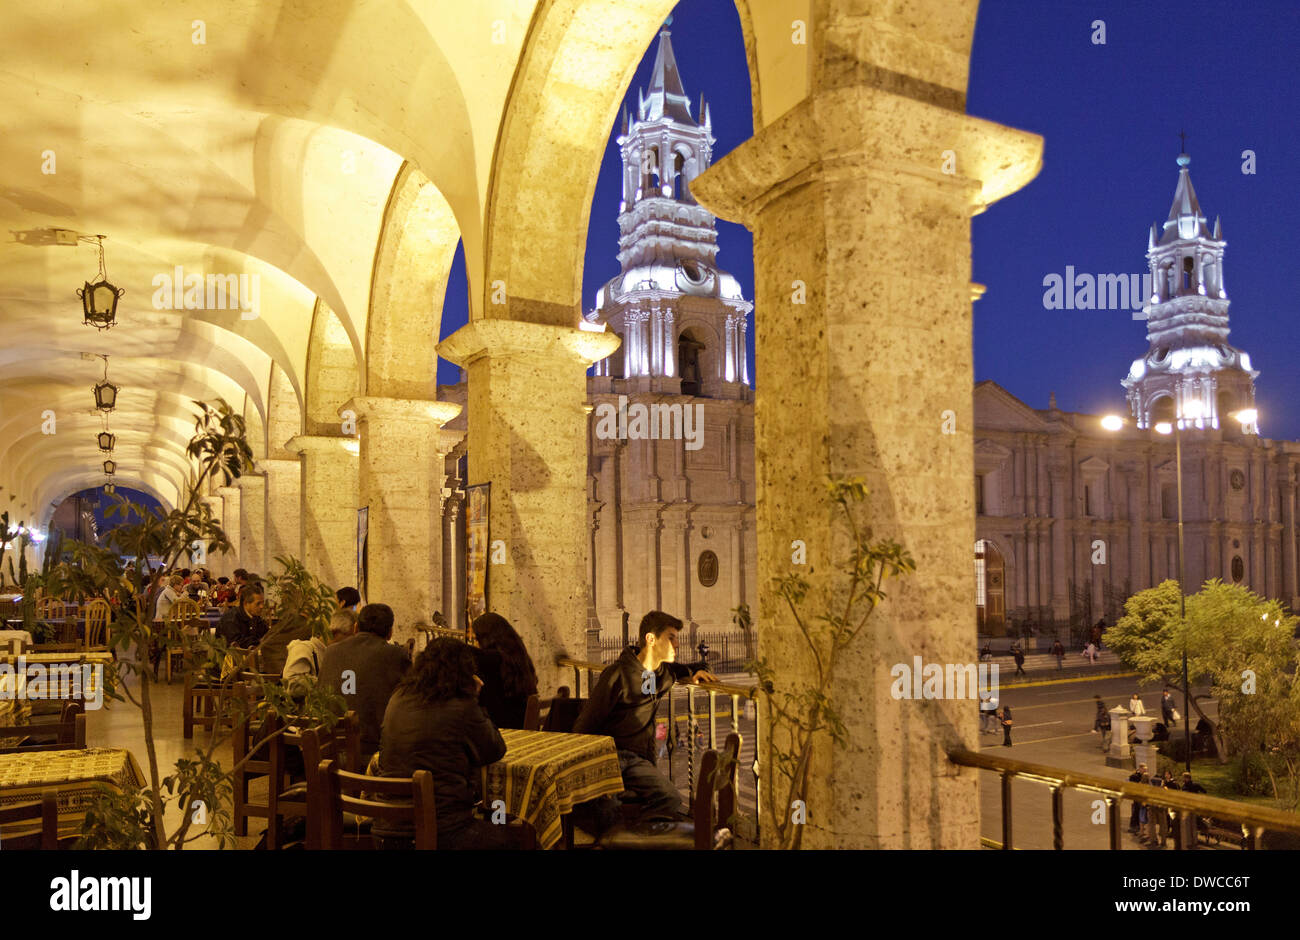 Cathedral at Plaza de Armas, Arequipa, Peru, South America Stock Photo